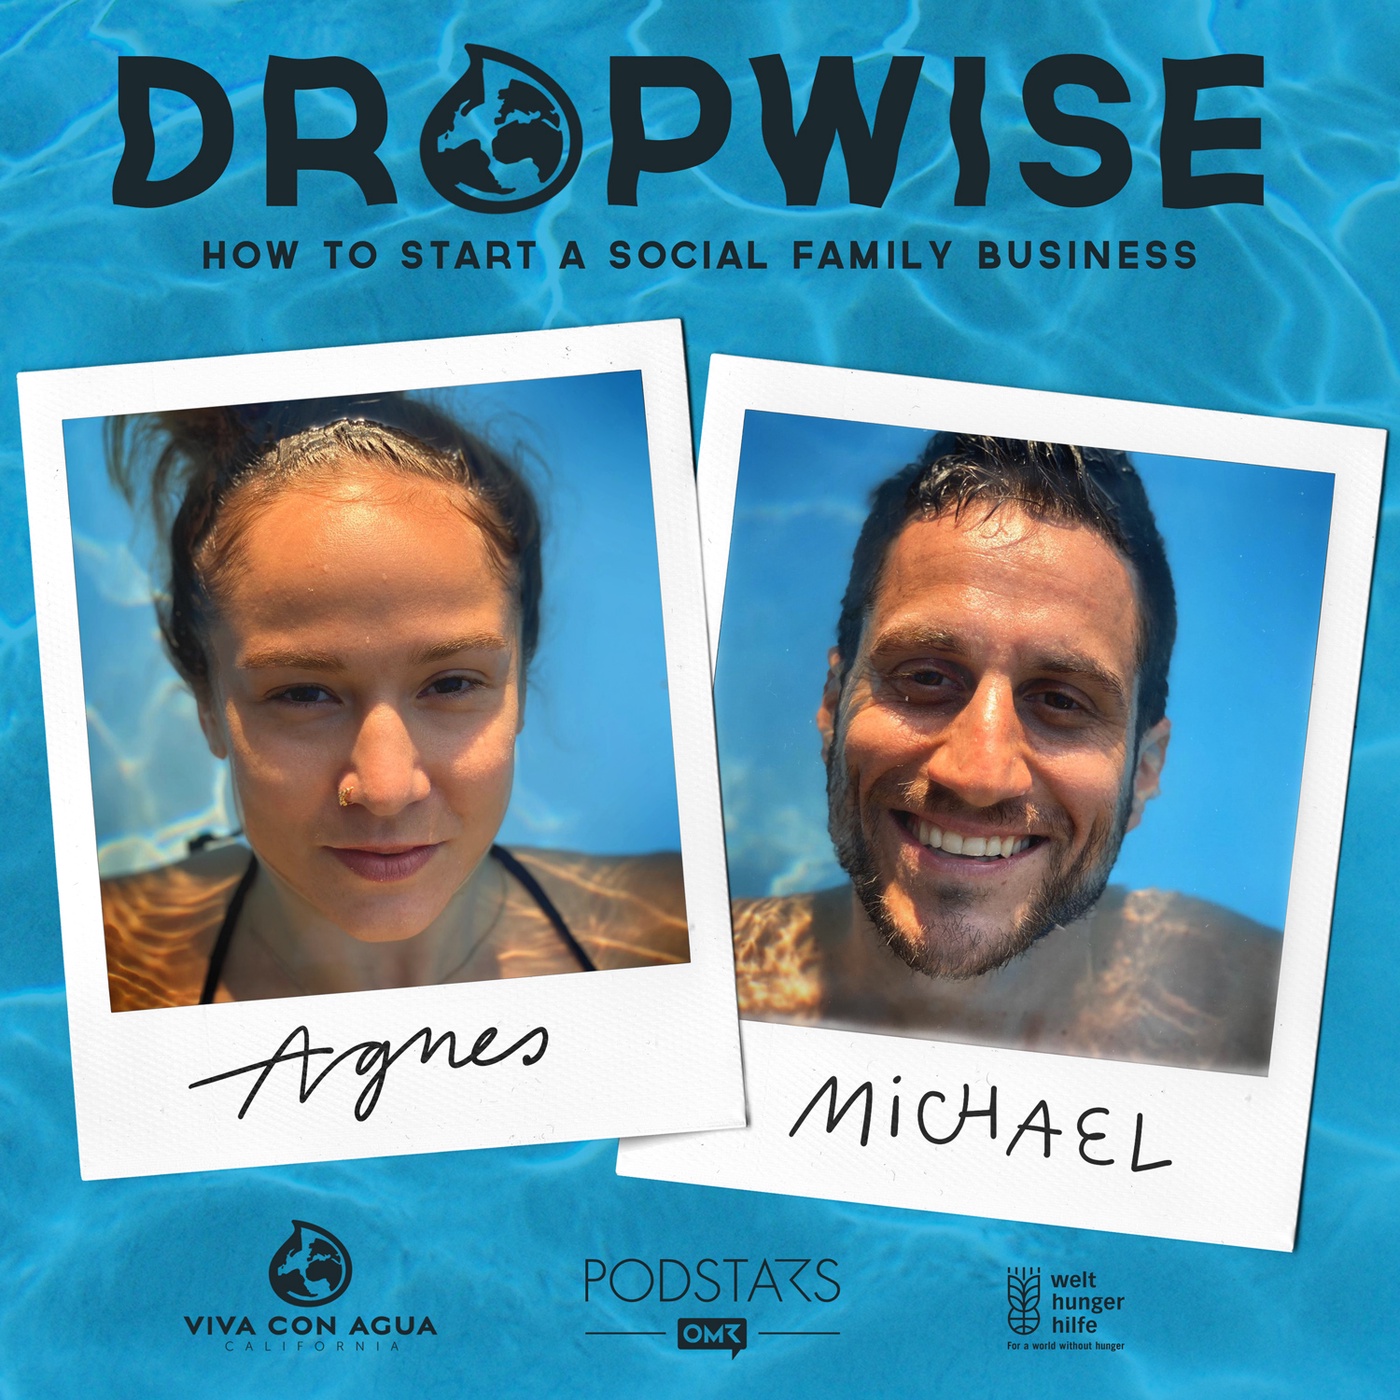 Dropwise #2 - The journey goes on